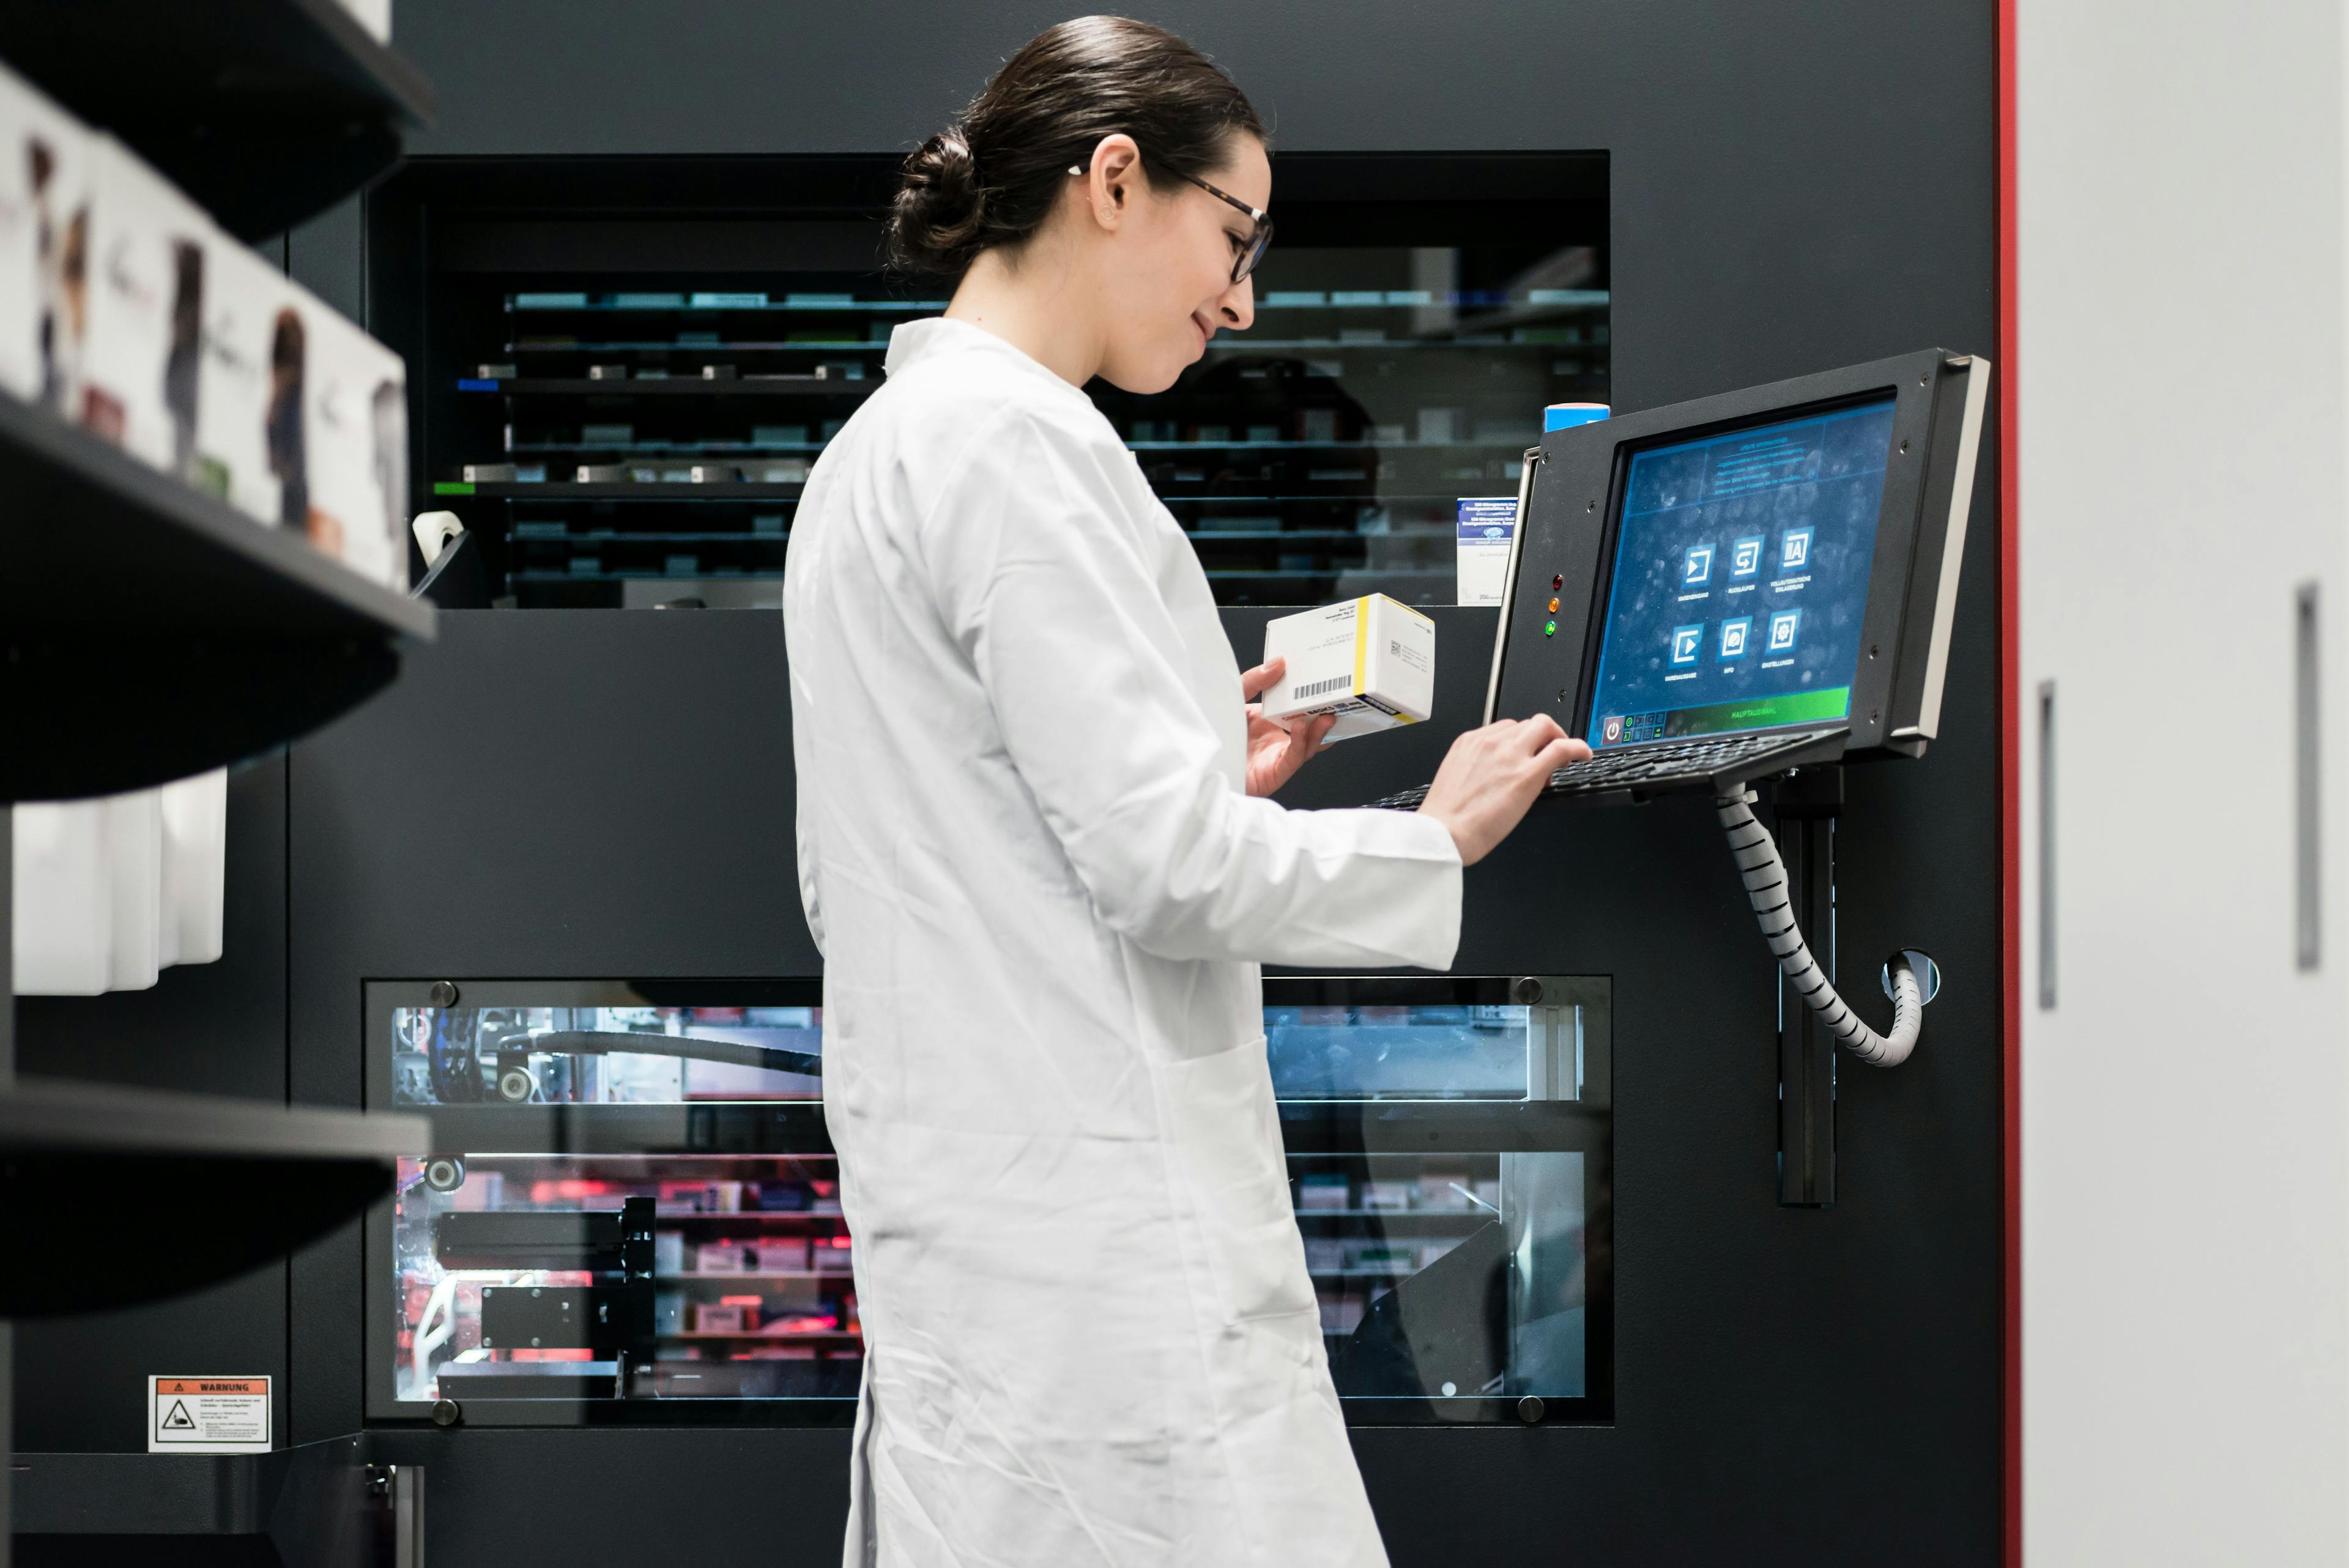 Can Pharmacy Automation Help Solve the Industry’s Labor Shortage?